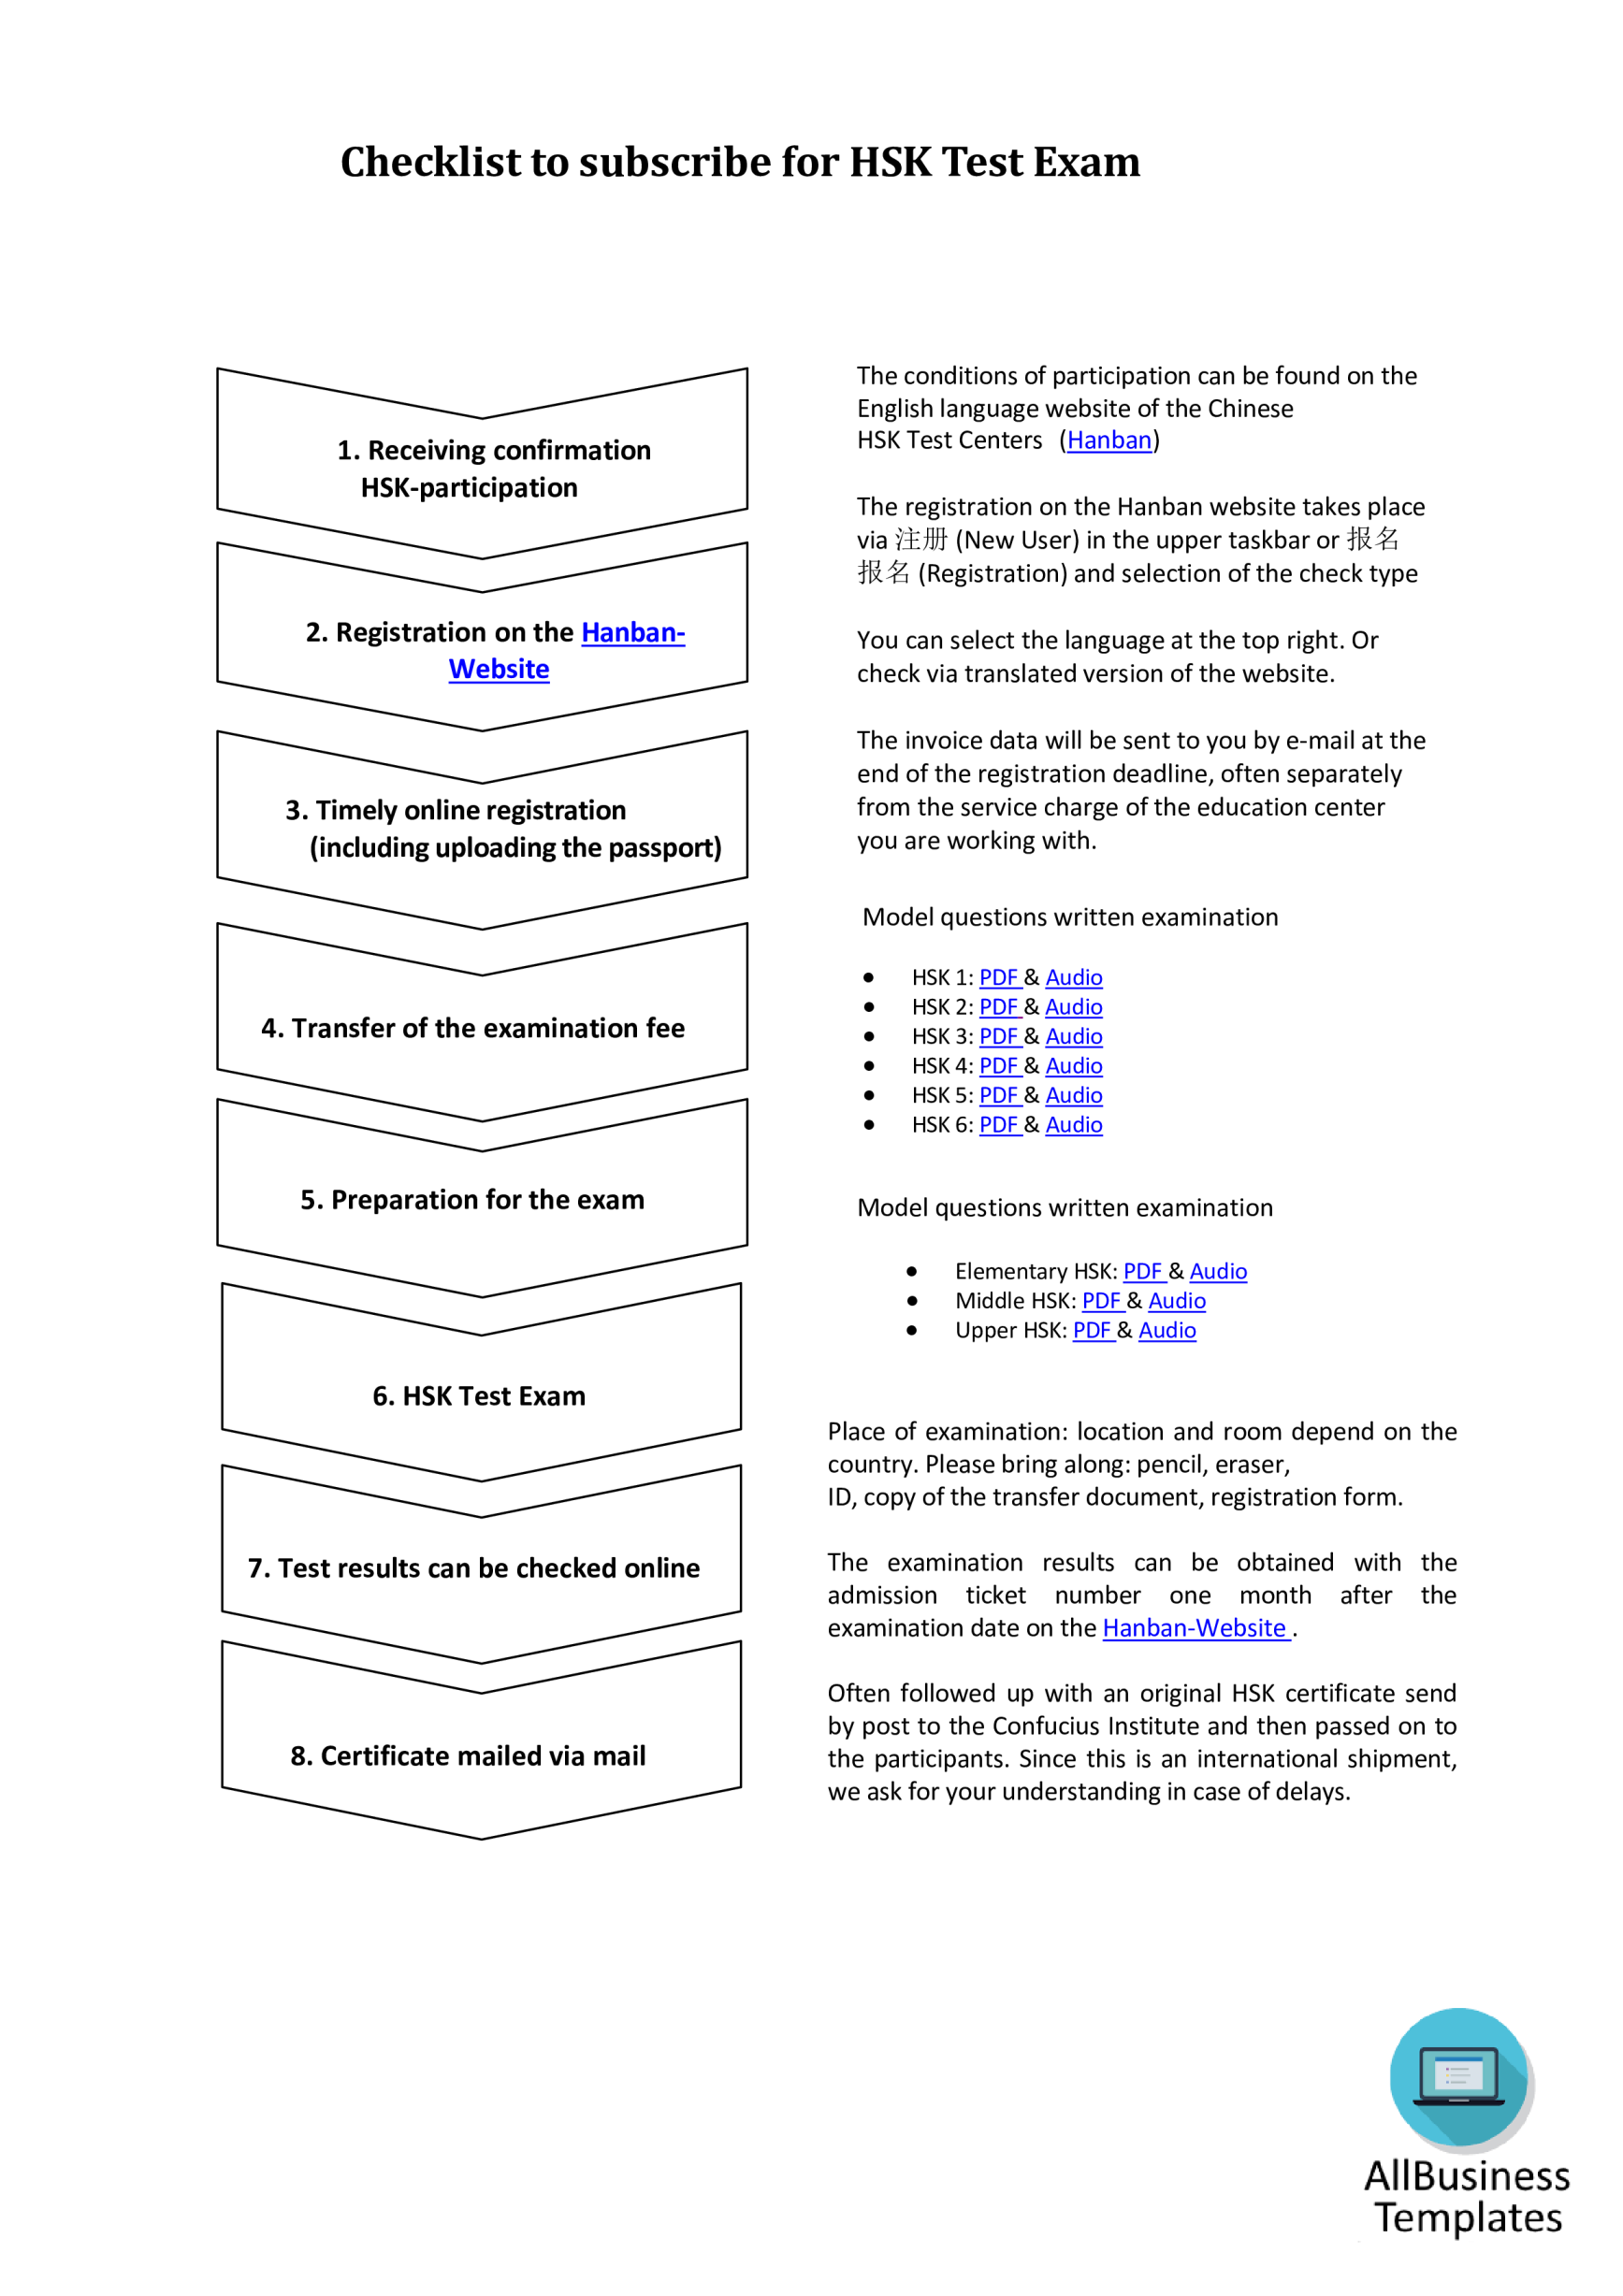 template topic preview image HSK Test Exam checklist